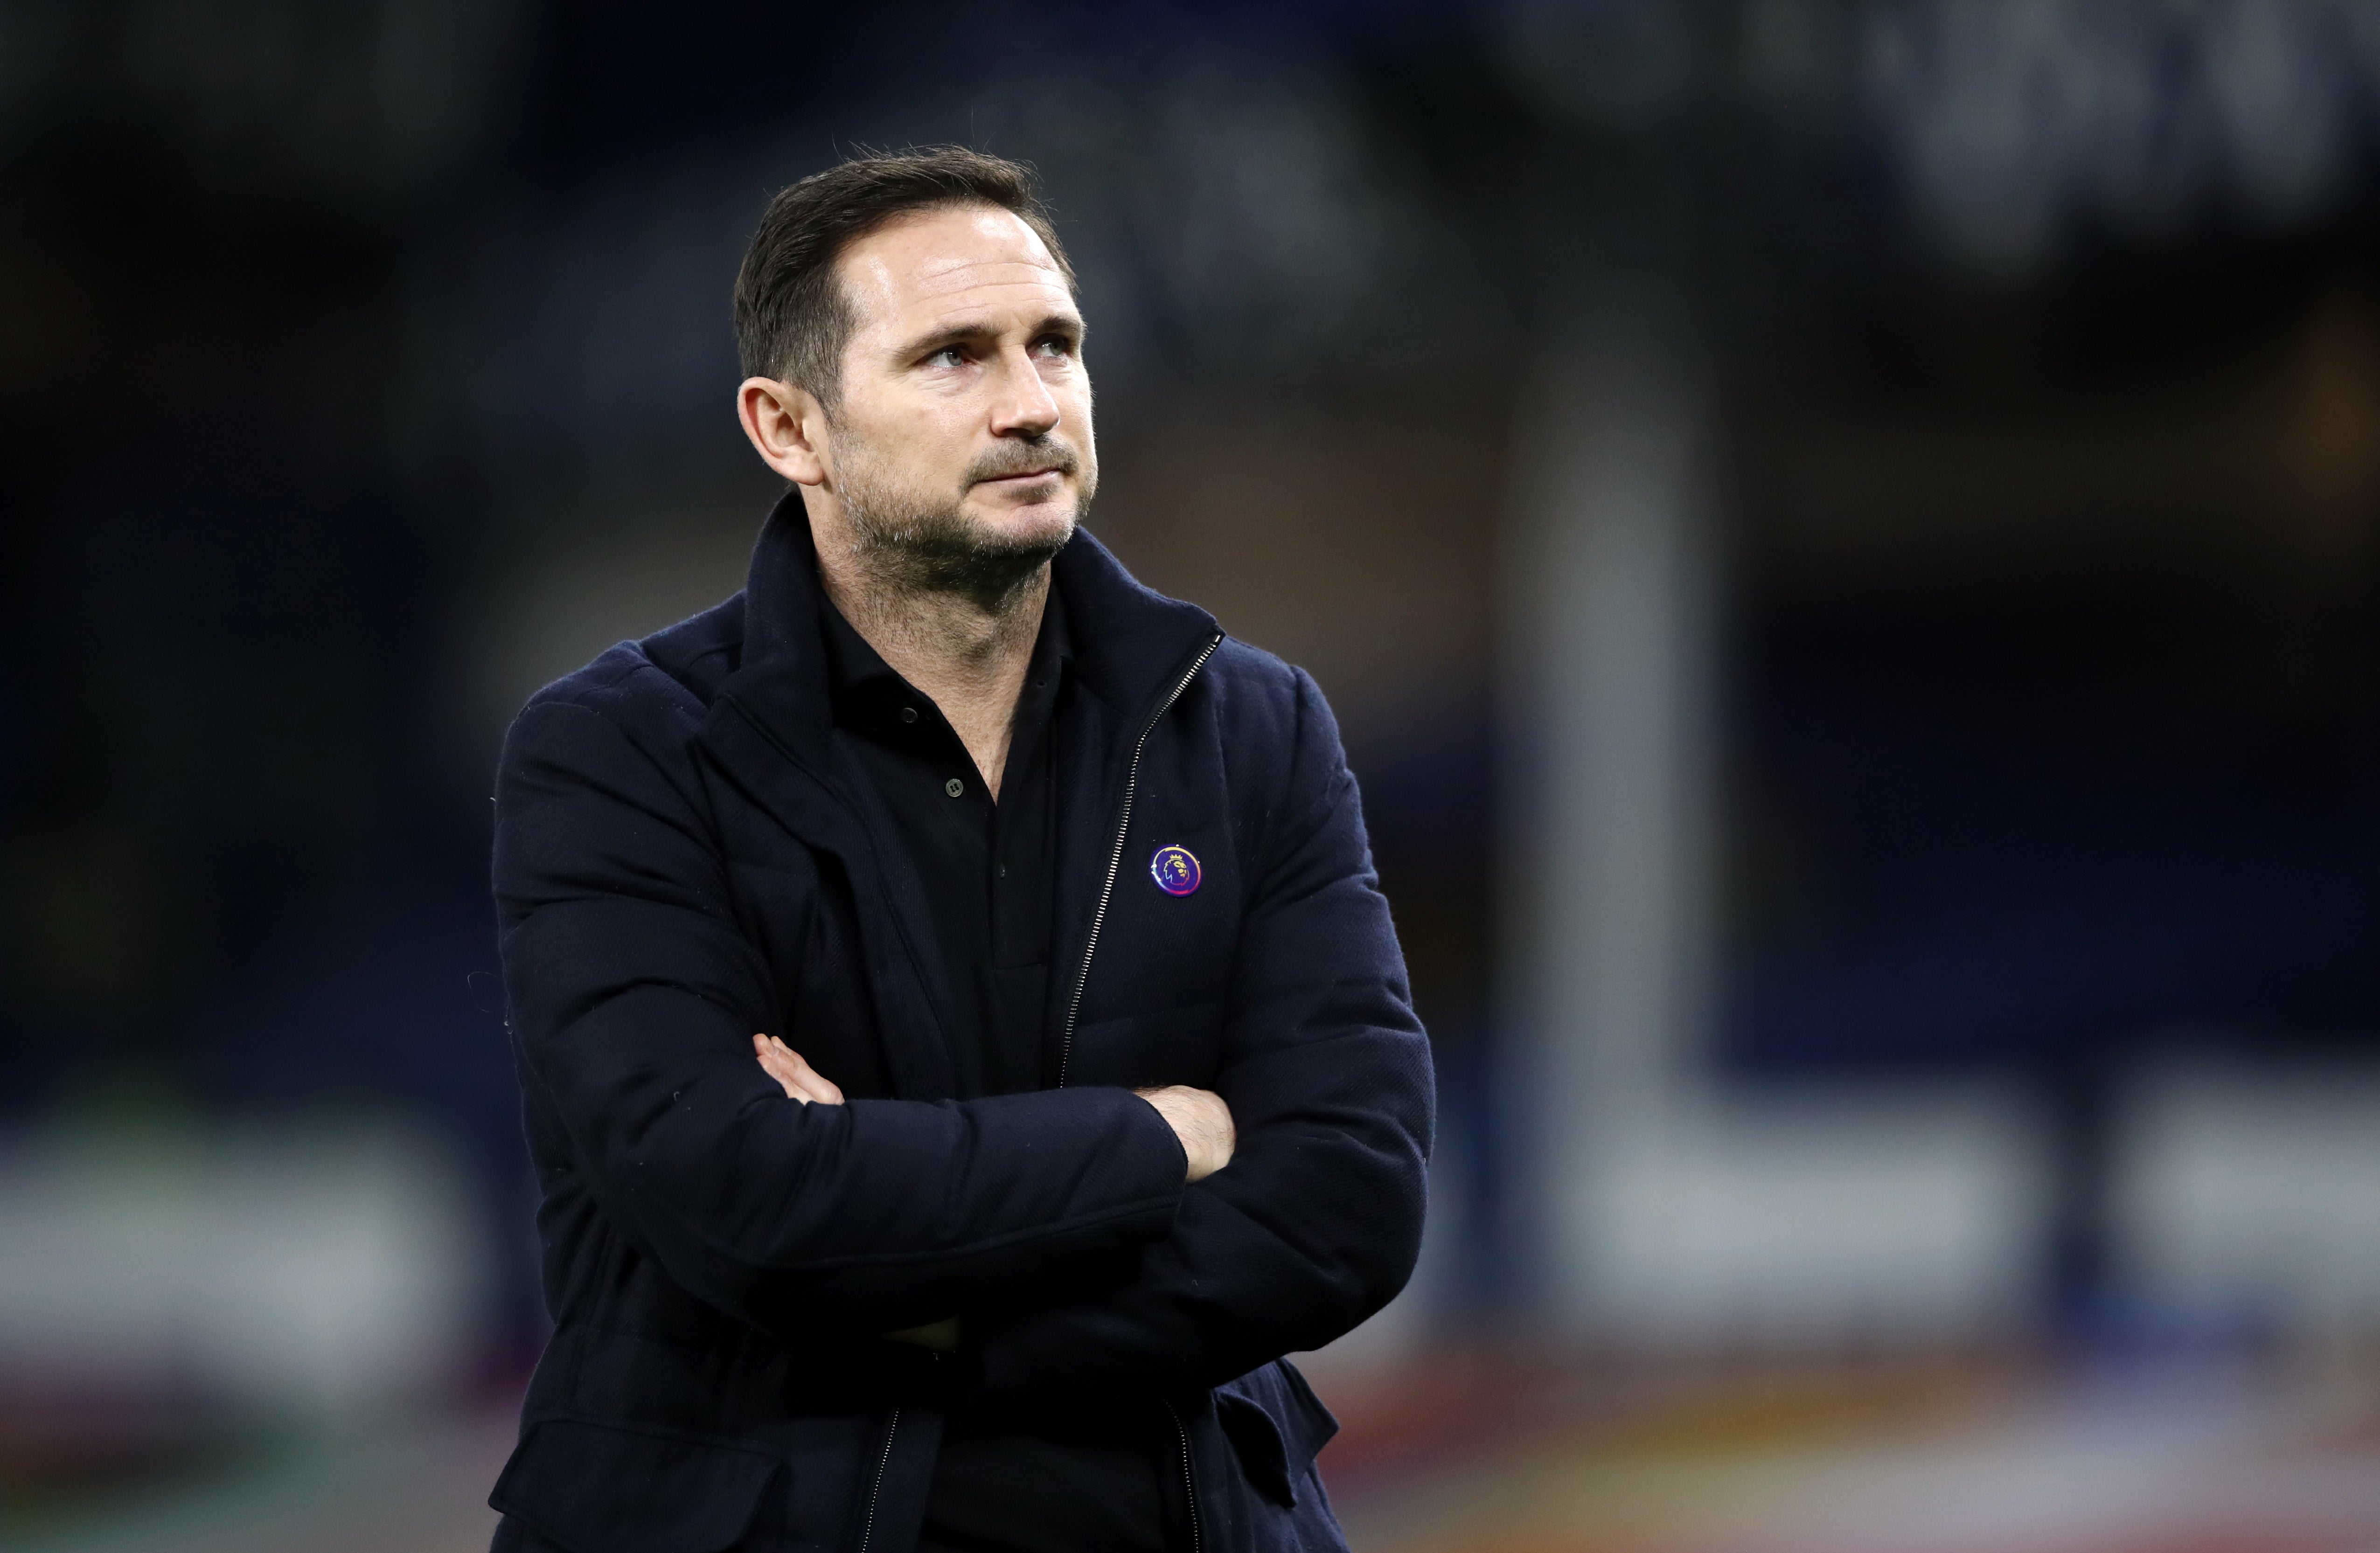 Frank Lampard is a frontrunner for the job